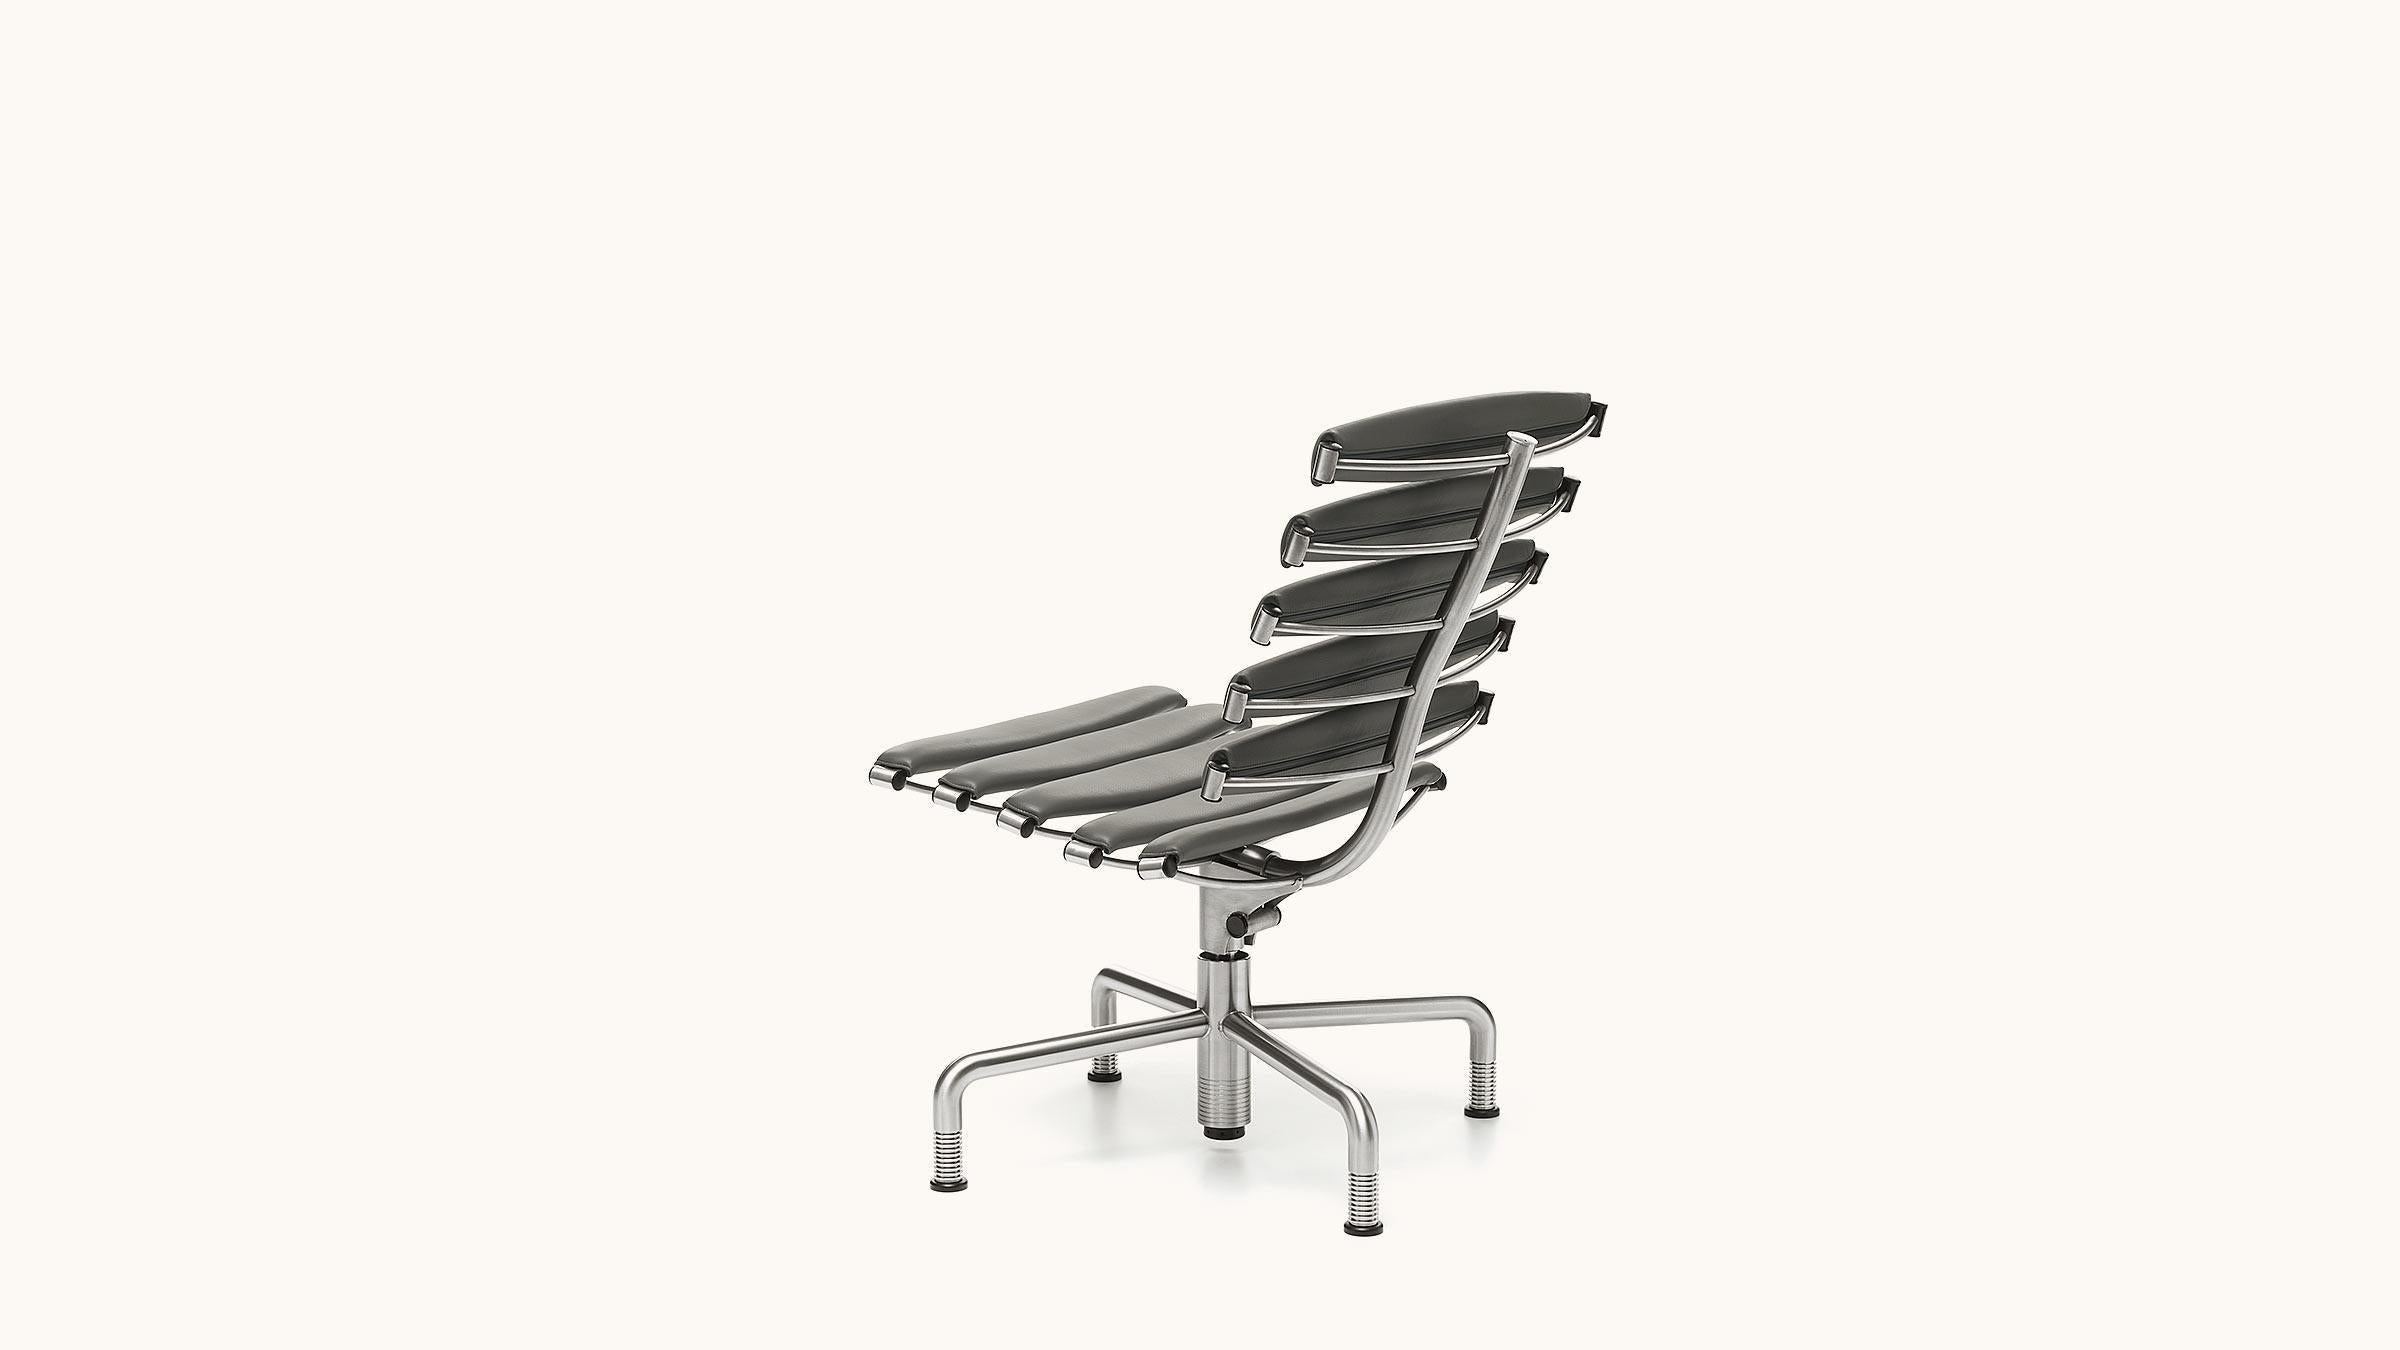 The slats on DS-2100 in finest leather adapt to individual body contours and provide, with its embracing feeling, the highest level of comfort. Available as a low-backed, visitor swivel chair, a high-backed executive chair, with headrest, tilt